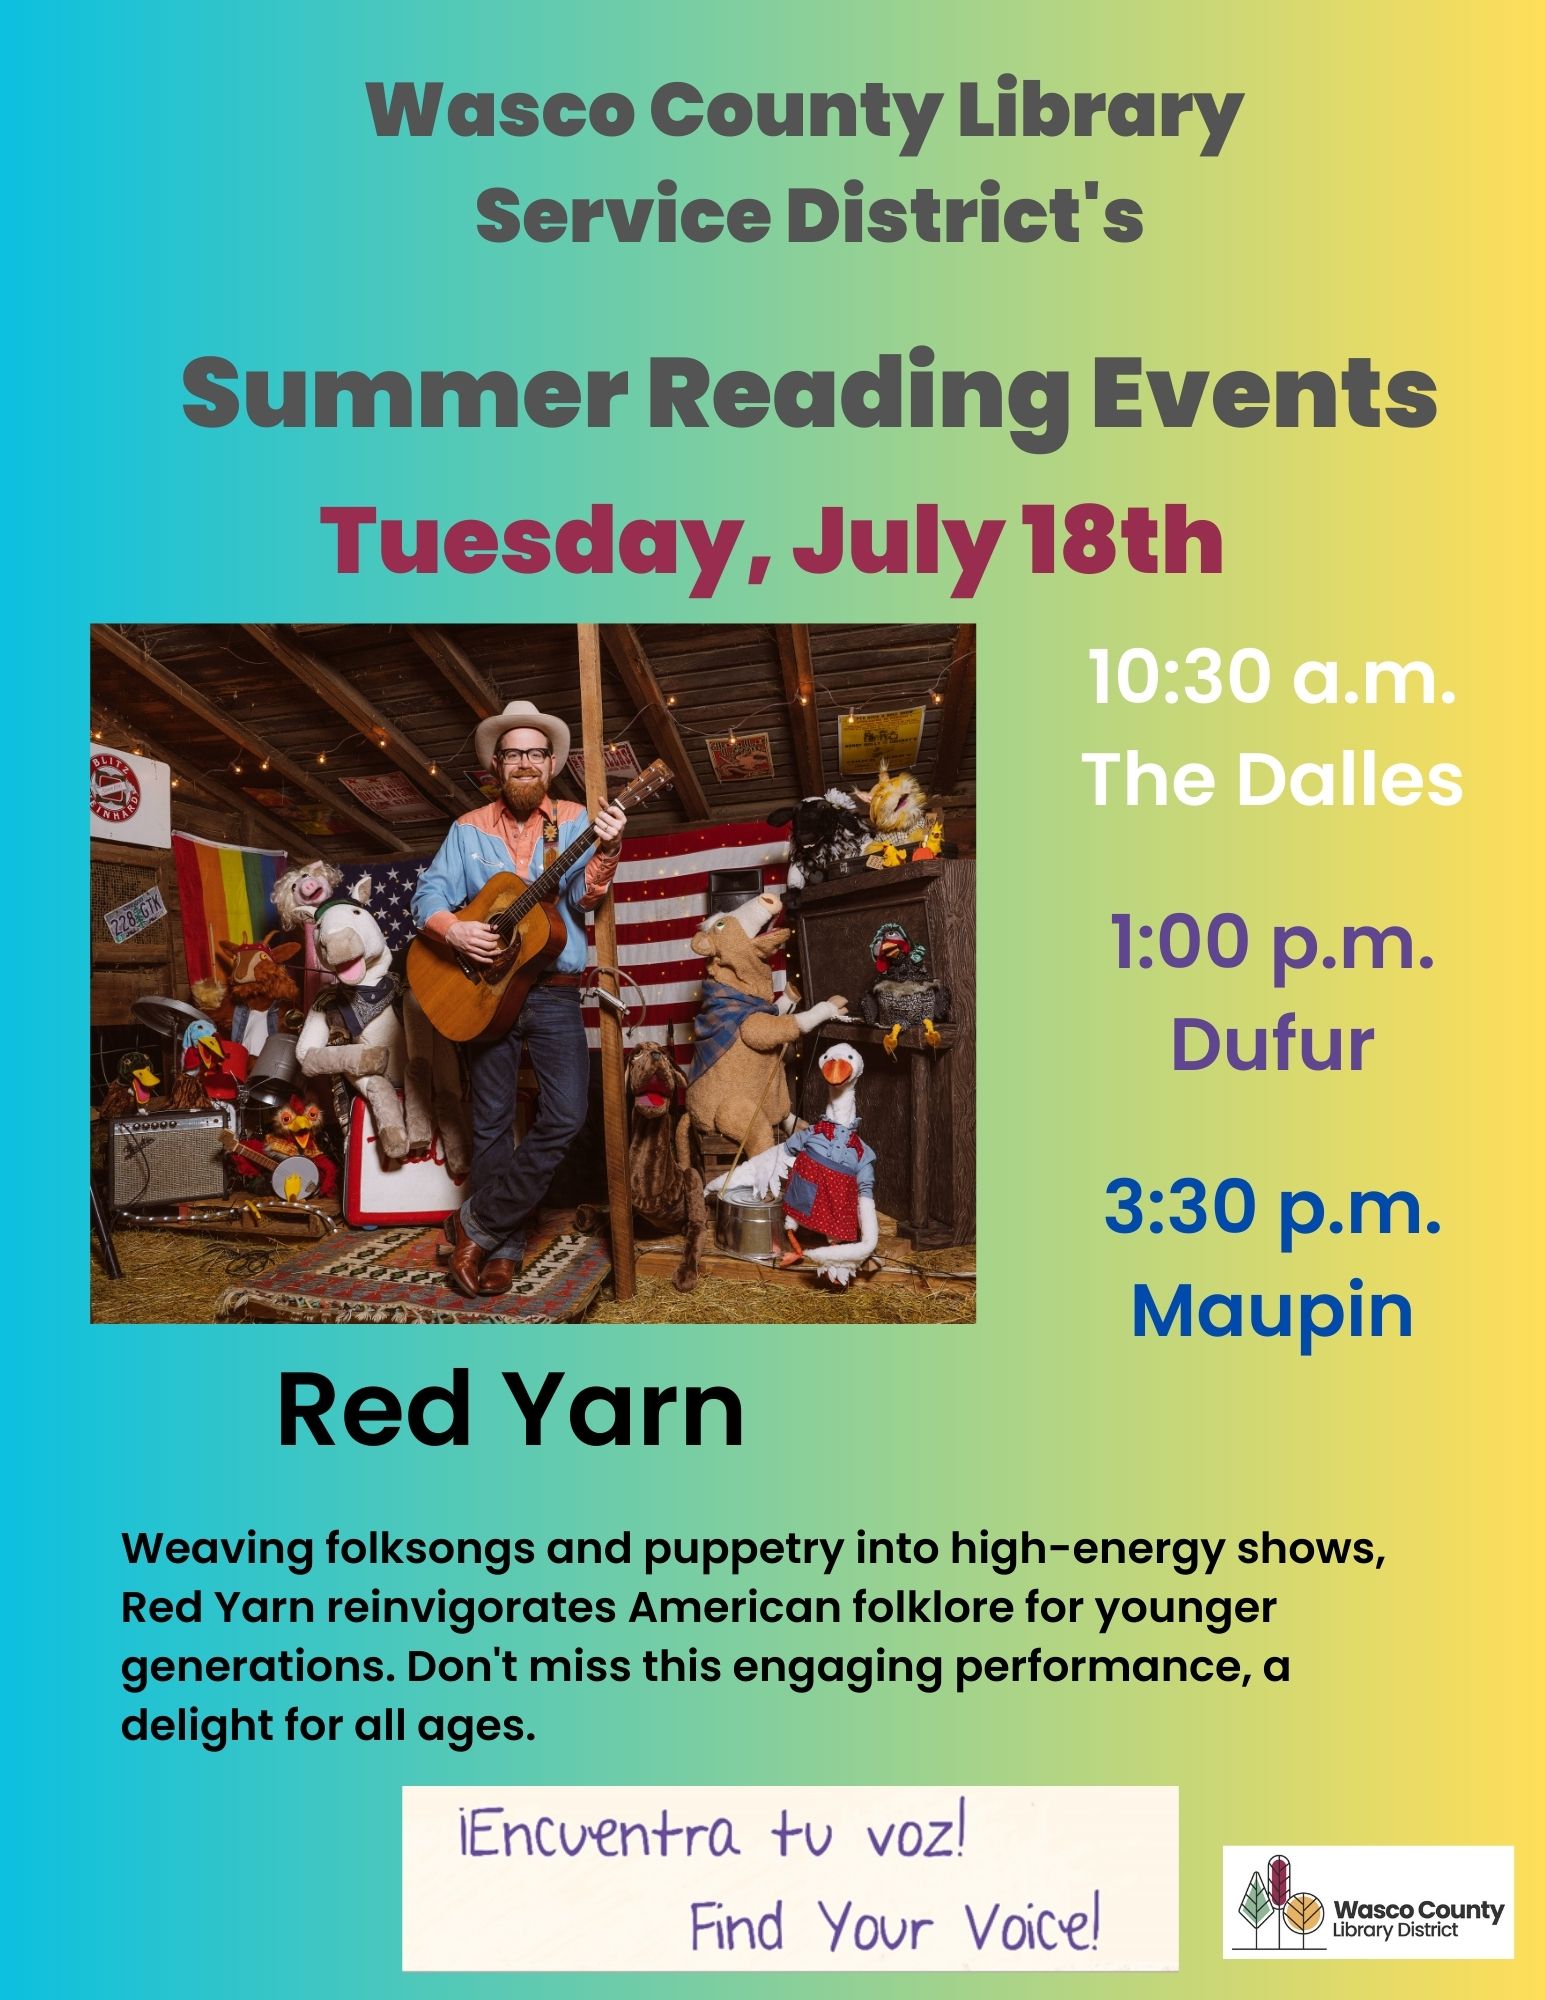 Red Yarn weaves folksongs and puppetry into high-energy shows for all ages.